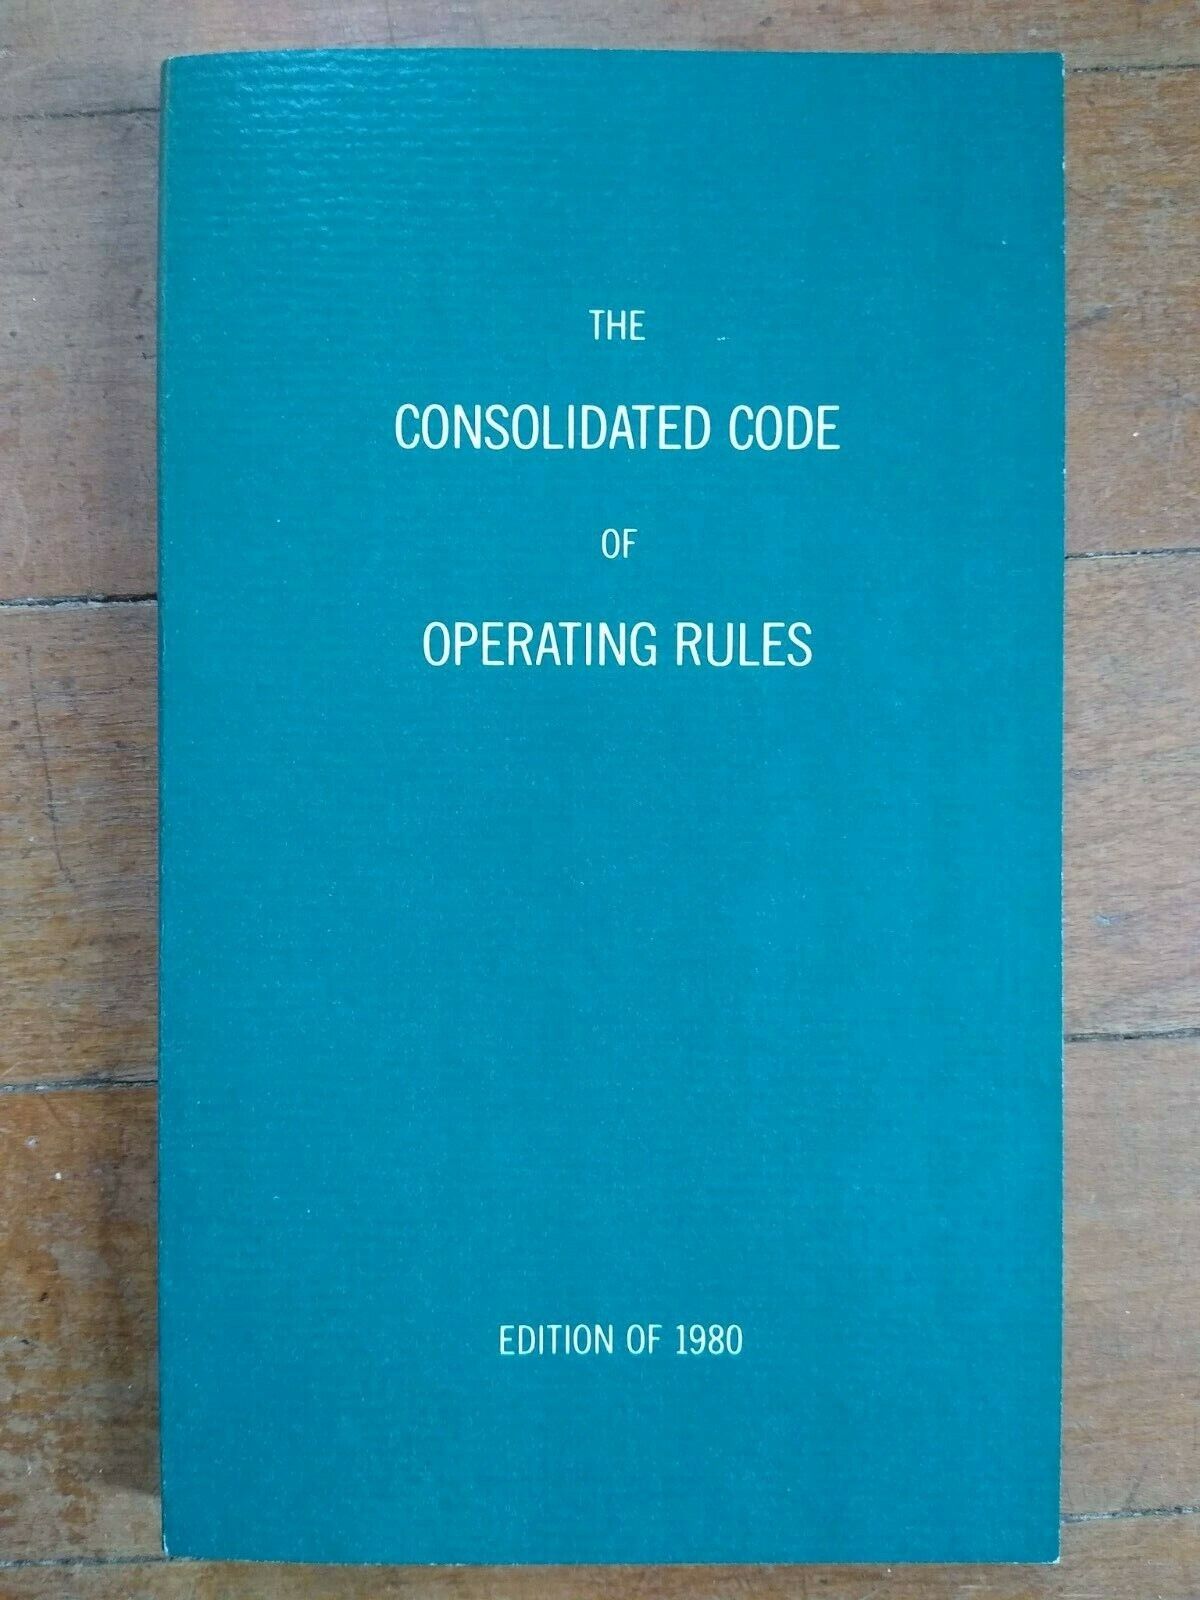 Consolidated Code of Operating Rules, Burlington Northern, 1980, Excellent